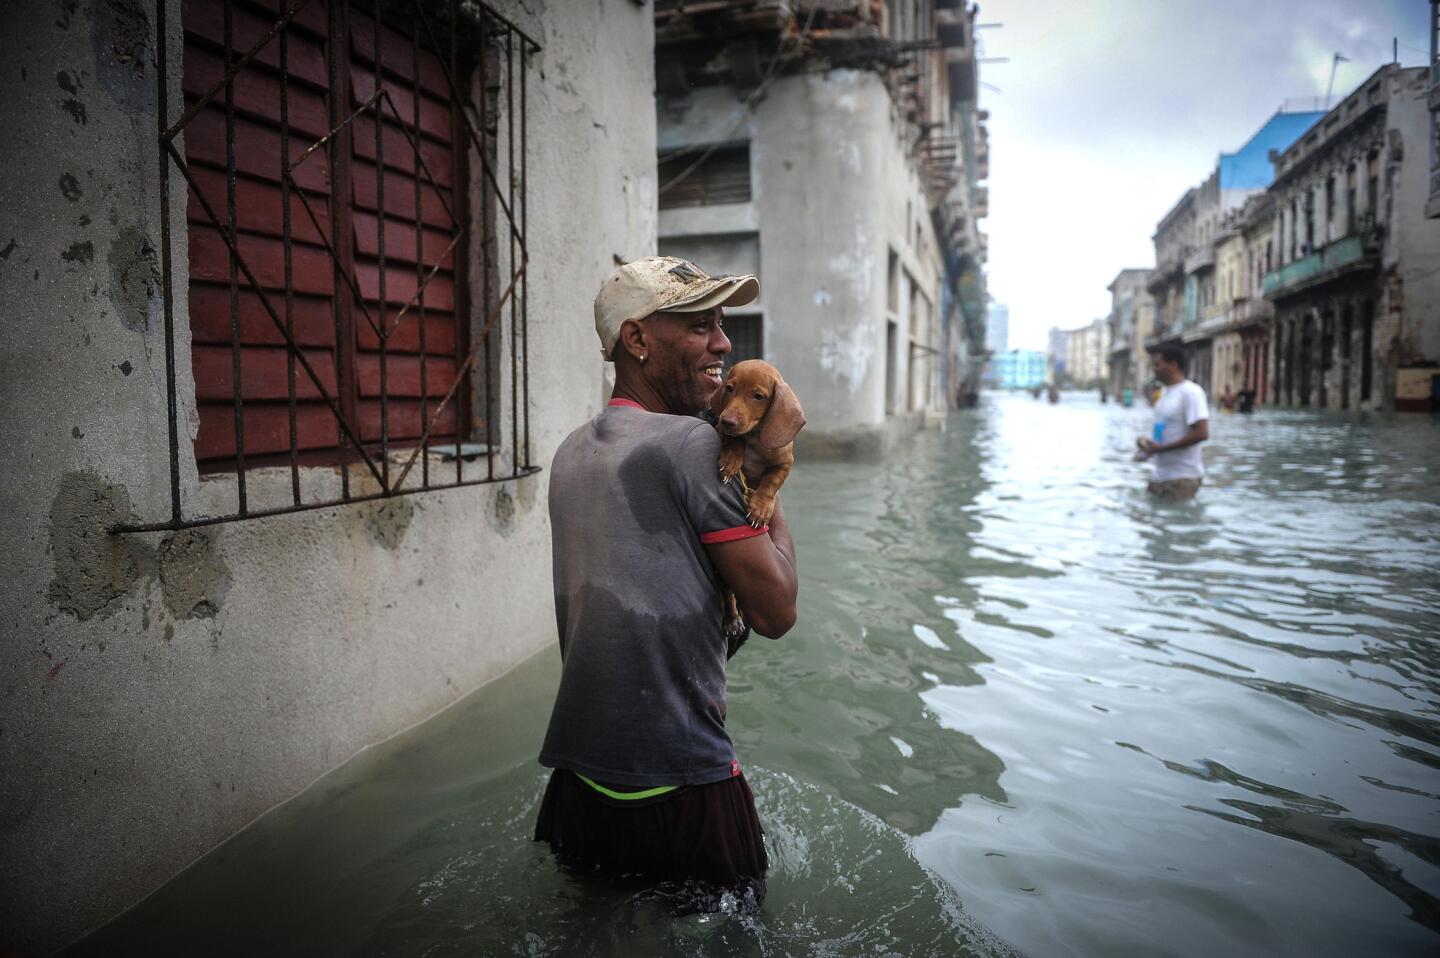 A Cuban carrying his pet wades through a flooded street in Havana on Sept. 10, 2017.